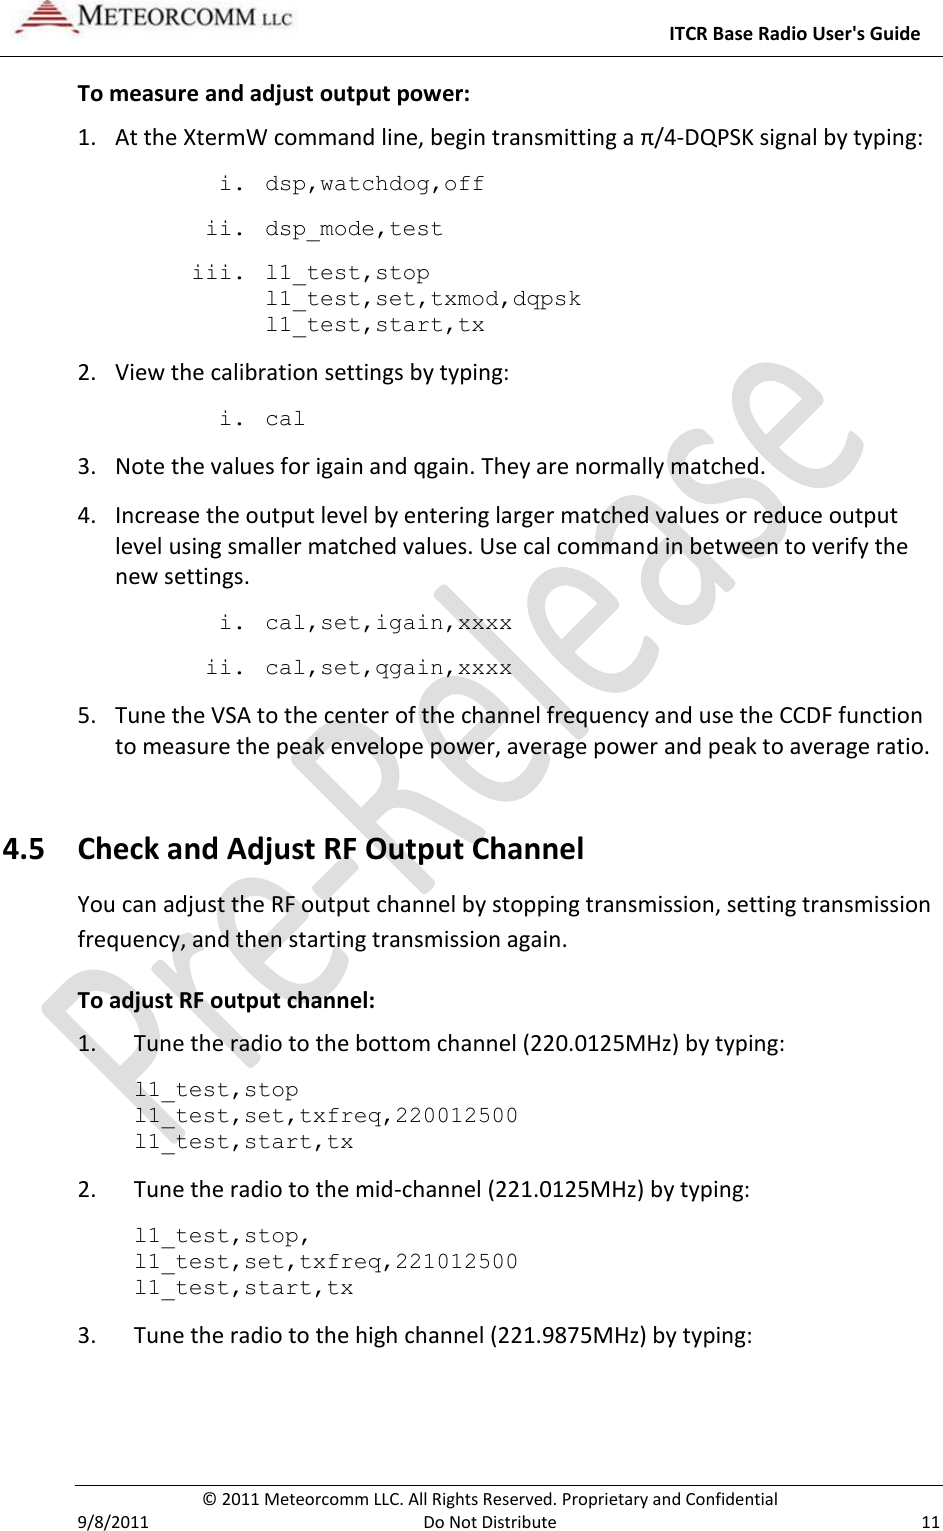     ITCR Base Radio User&apos;s Guide   © 2011 Meteorcomm LLC. All Rights Reserved. Proprietary and Confidential   9/8/2011  Do Not Distribute  11 To measure and adjust output power: 1. At the XtermW command line, begin transmitting a π/4-DQPSK signal by typing: i. dsp,watchdog,off ii. dsp_mode,test iii. l1_test,stop l1_test,set,txmod,dqpsk l1_test,start,tx 2. View the calibration settings by typing: i. cal 3. Note the values for igain and qgain. They are normally matched. 4. Increase the output level by entering larger matched values or reduce output level using smaller matched values. Use cal command in between to verify the new settings. i. cal,set,igain,xxxx ii. cal,set,qgain,xxxx  5. Tune the VSA to the center of the channel frequency and use the CCDF function to measure the peak envelope power, average power and peak to average ratio.  4.5 Check and Adjust RF Output Channel You can adjust the RF output channel by stopping transmission, setting transmission frequency, and then starting transmission again.  To adjust RF output channel: 1.  Tune the radio to the bottom channel (220.0125MHz) by typing: l1_test,stop l1_test,set,txfreq,220012500 l1_test,start,tx   2.  Tune the radio to the mid-channel (221.0125MHz) by typing: l1_test,stop, l1_test,set,txfreq,221012500 l1_test,start,tx   3.  Tune the radio to the high channel (221.9875MHz) by typing: 